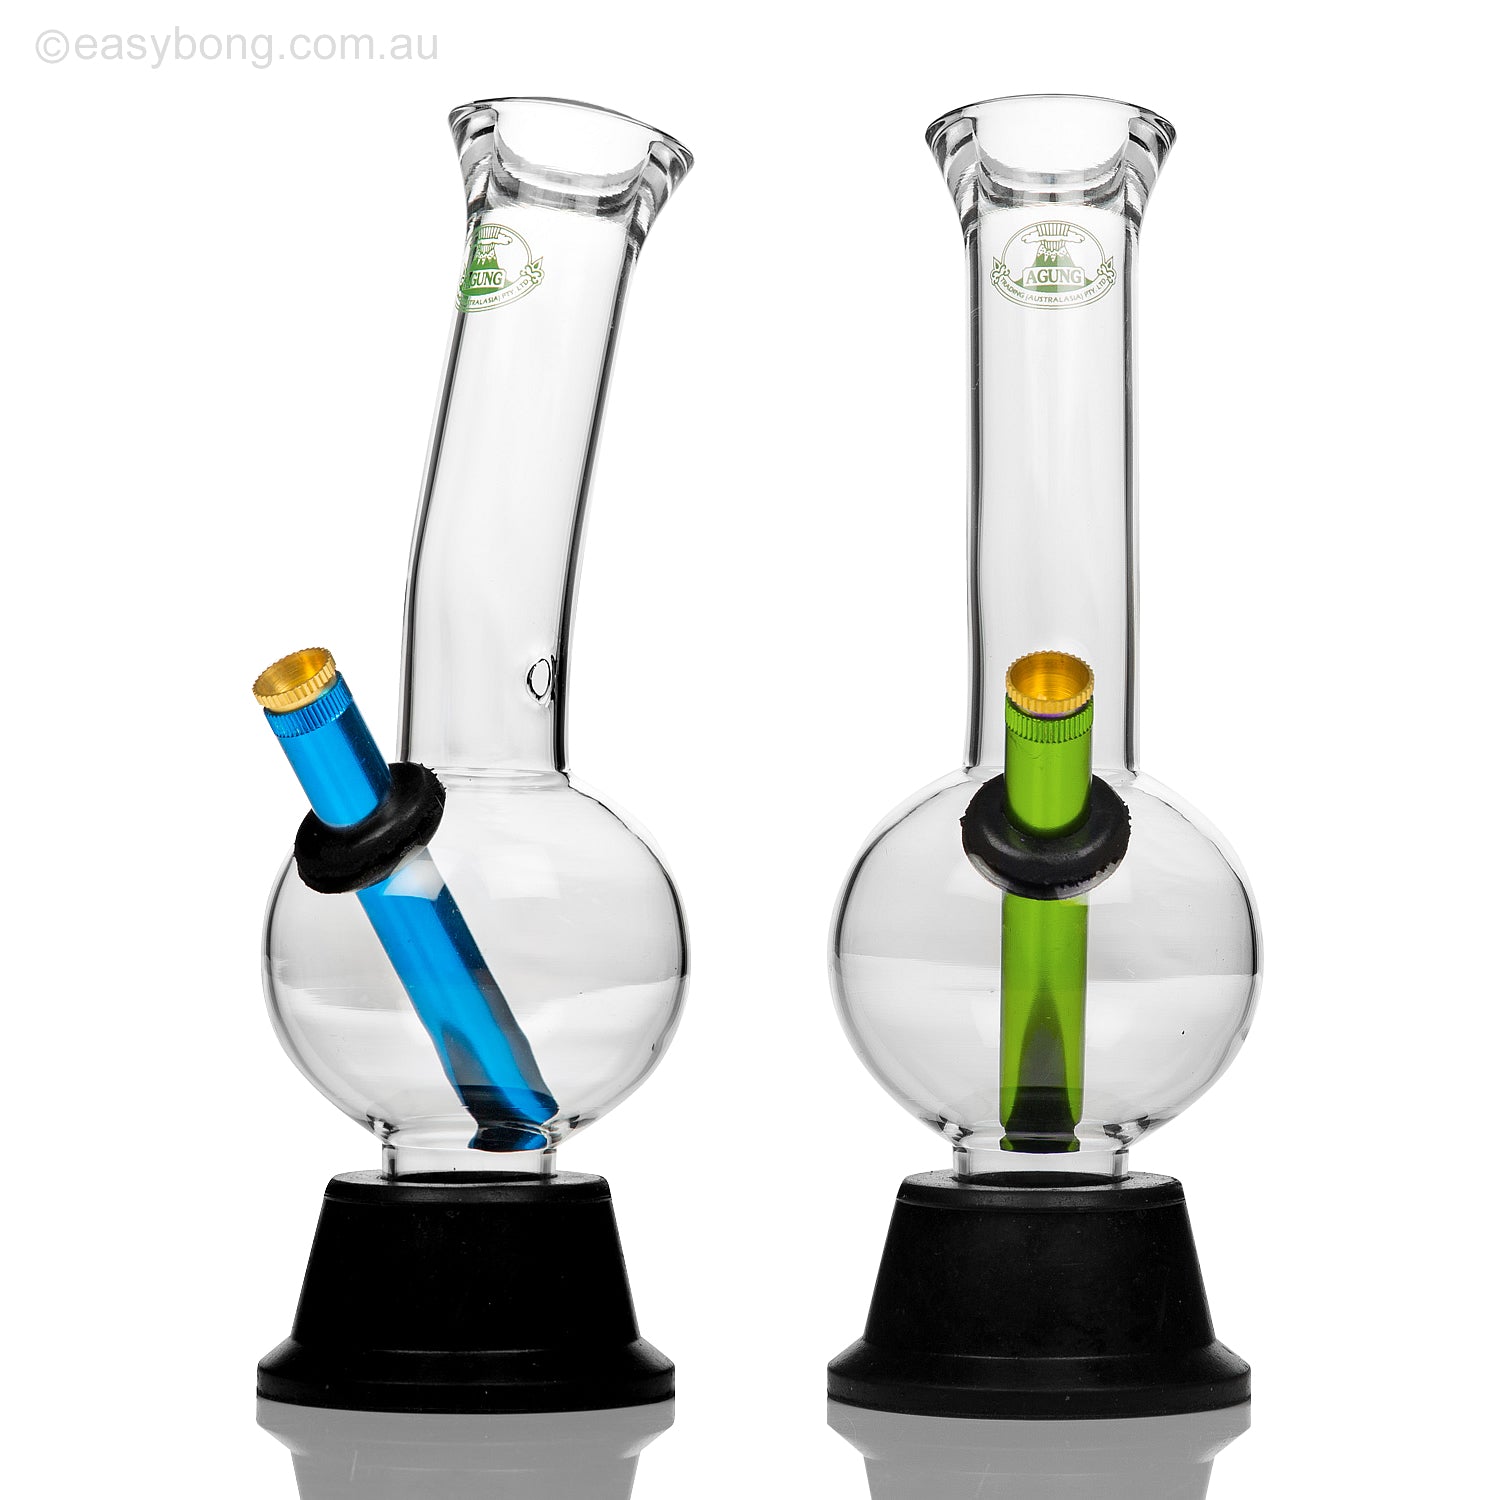  Easy Bong glass bong from Agung Australia with cone piece and stem.